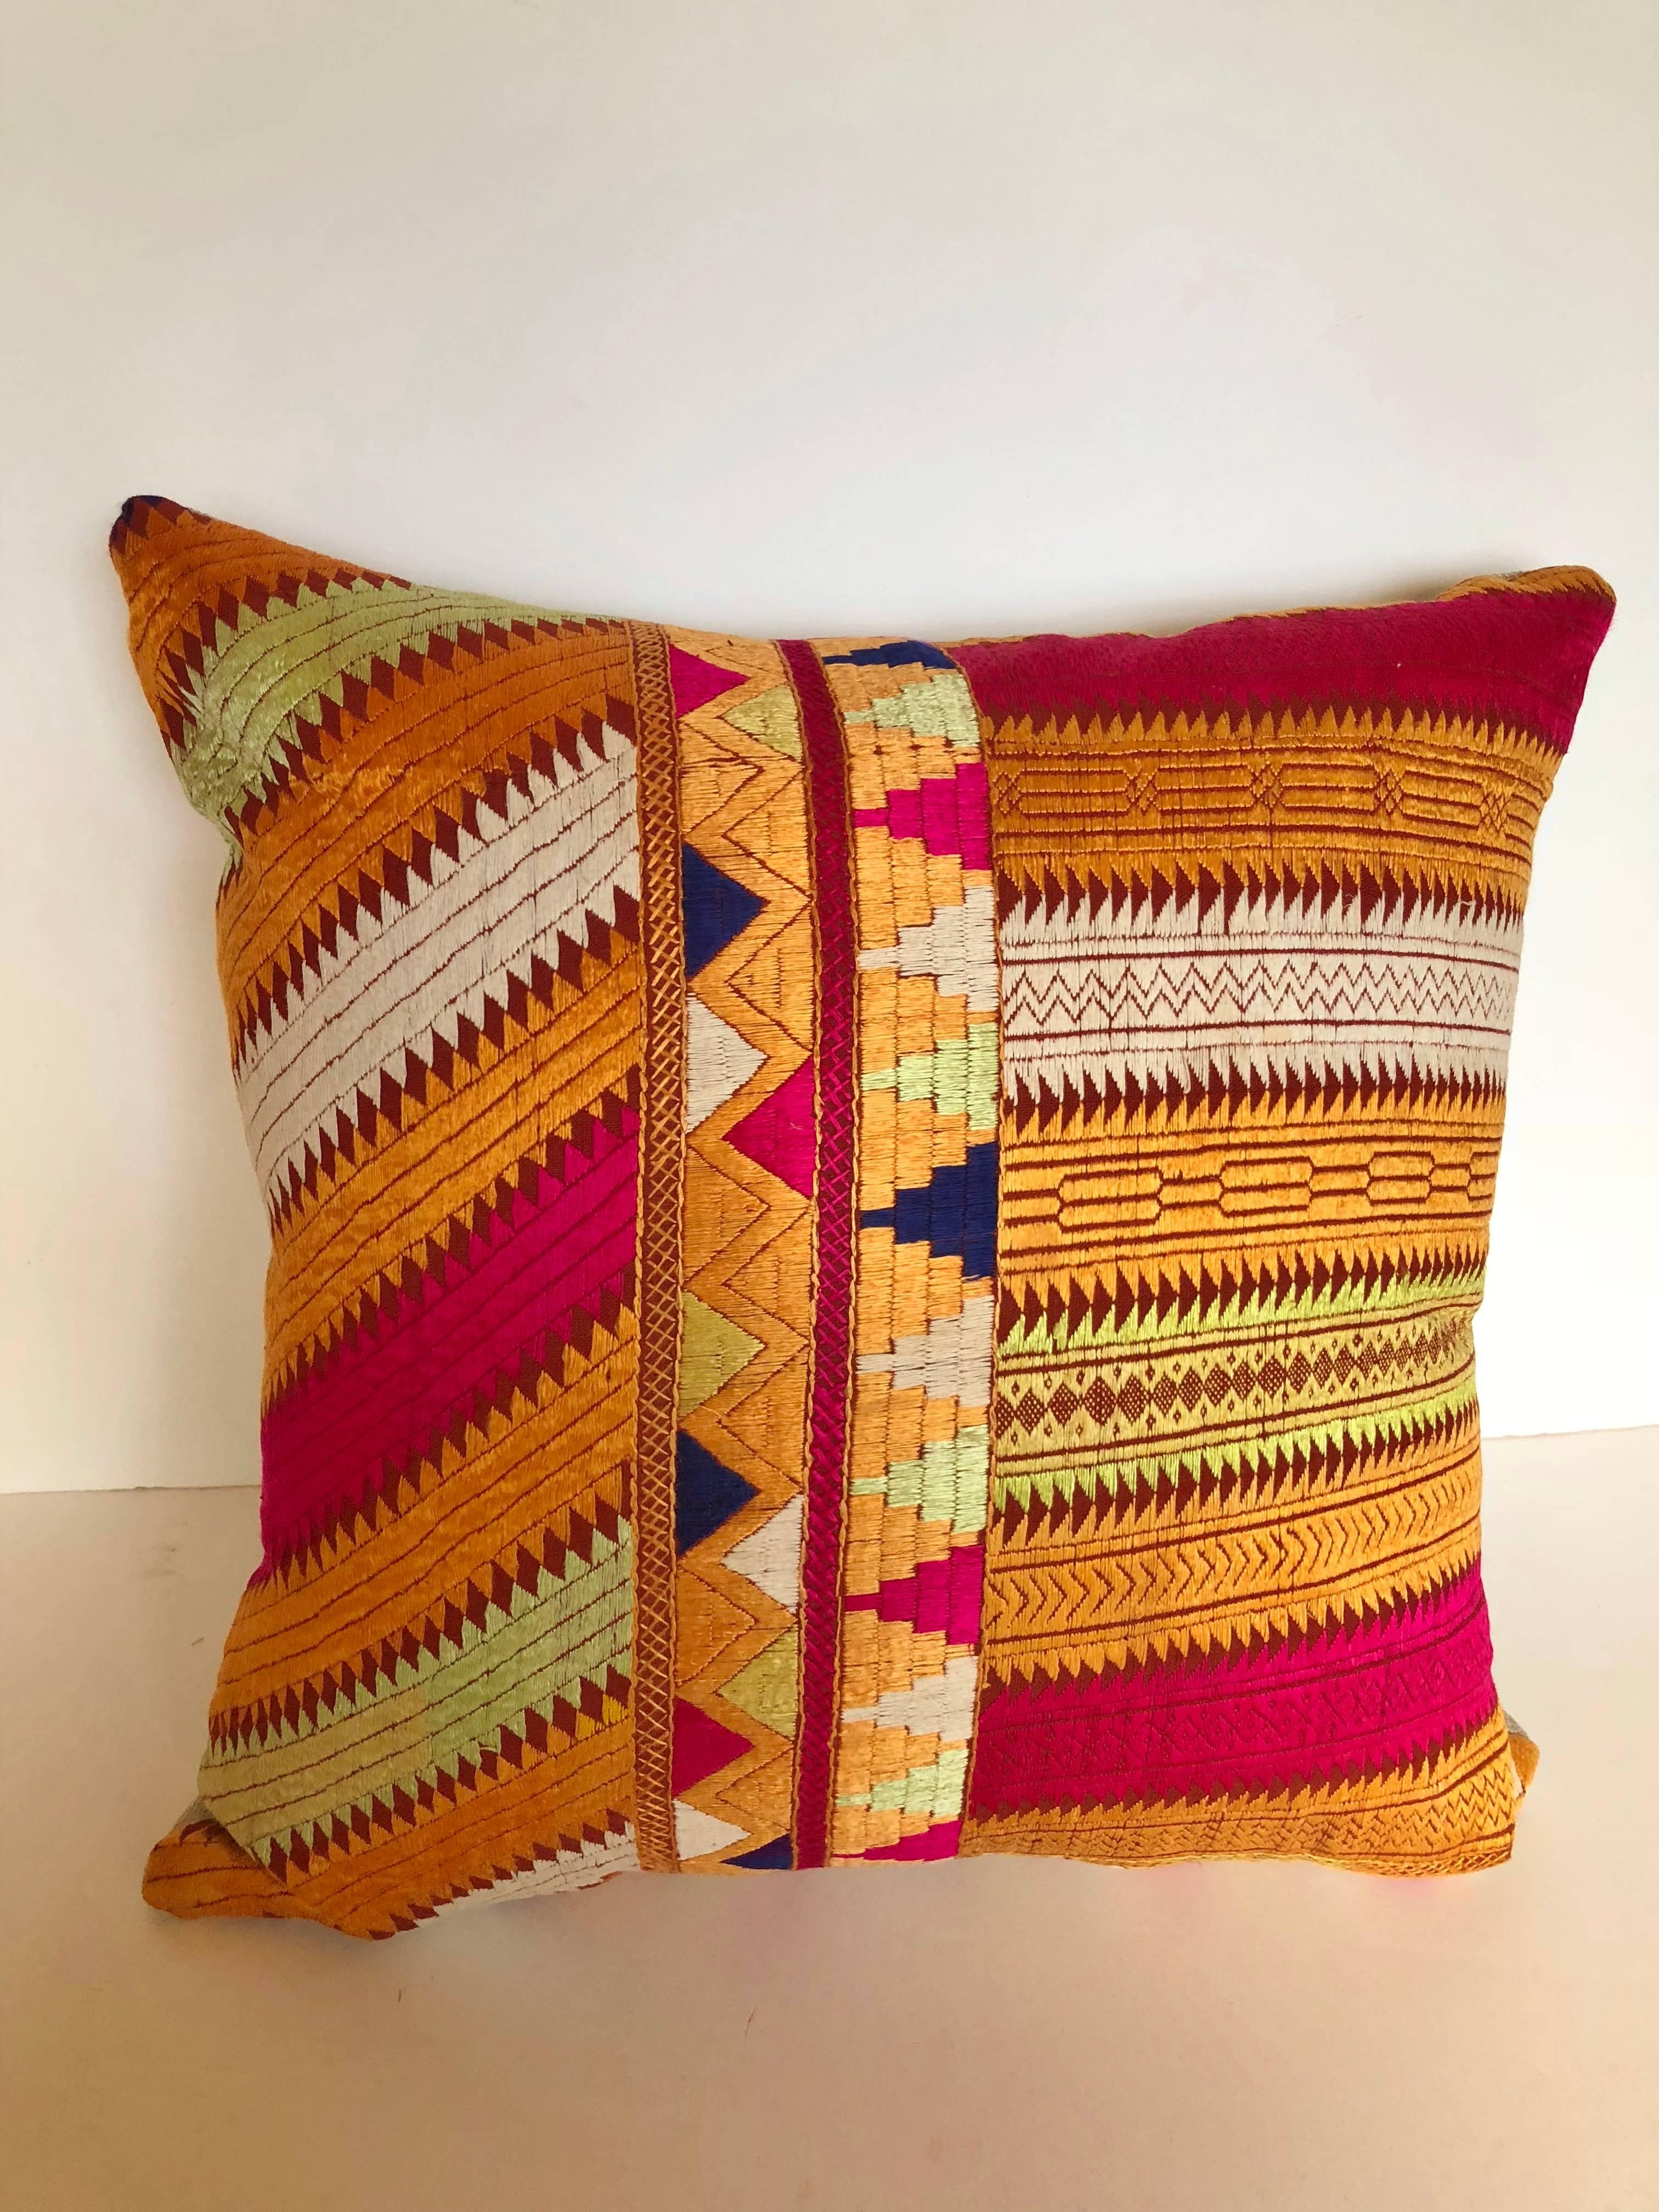 Custom pillow cut from a vintage silk embroidered Phulkari Bagh wedding shawl from Punjab, India. Relatives of the young girl would embroider hand loomed cotton khadi cloth with brightly colored silk threads in traditional designs. The pillow is